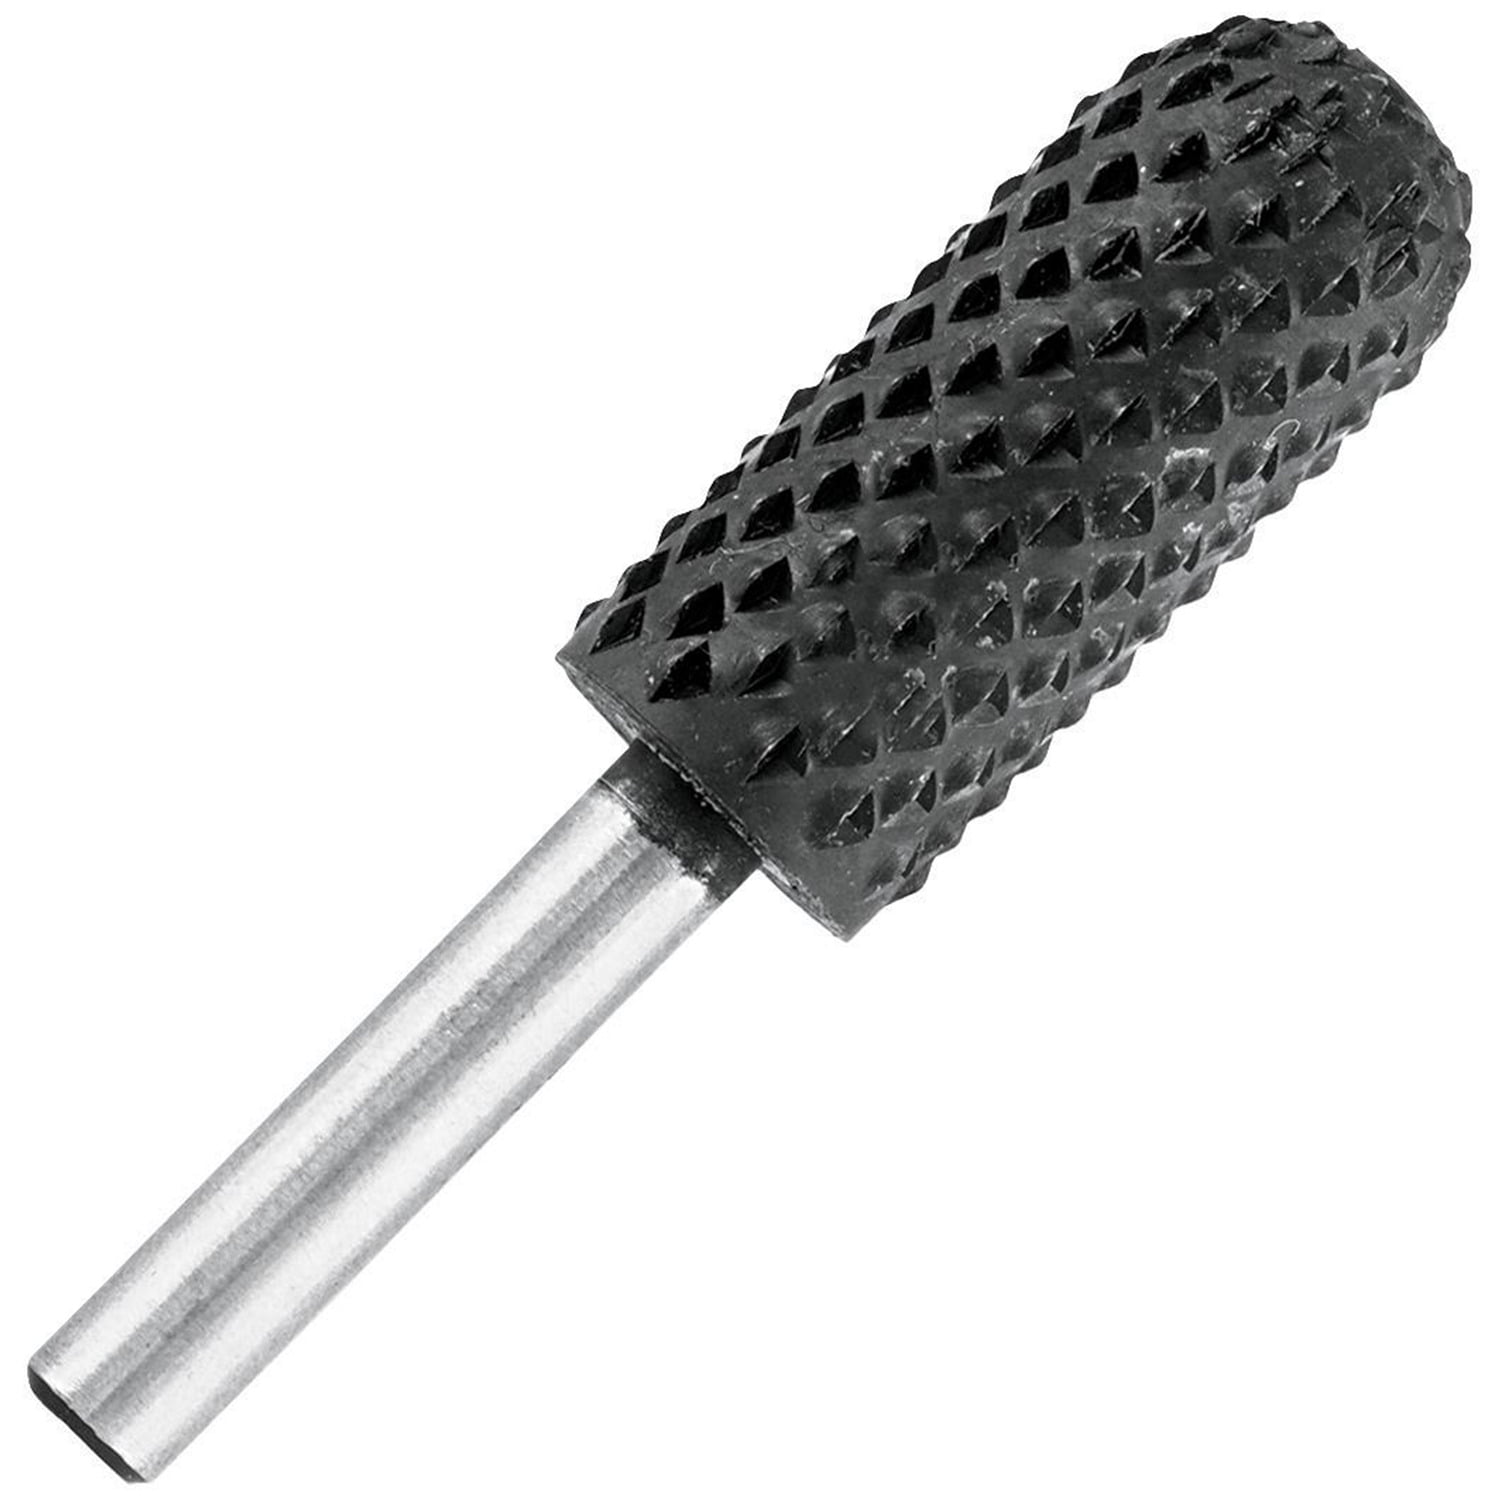 Vermont American 16682 5/8-Inch by 1-3/8-Inch Useable Length Domed Cylinder Shaped Metal 1/4-Inch Shank Rotary Rasp for Drill - image 1 of 2